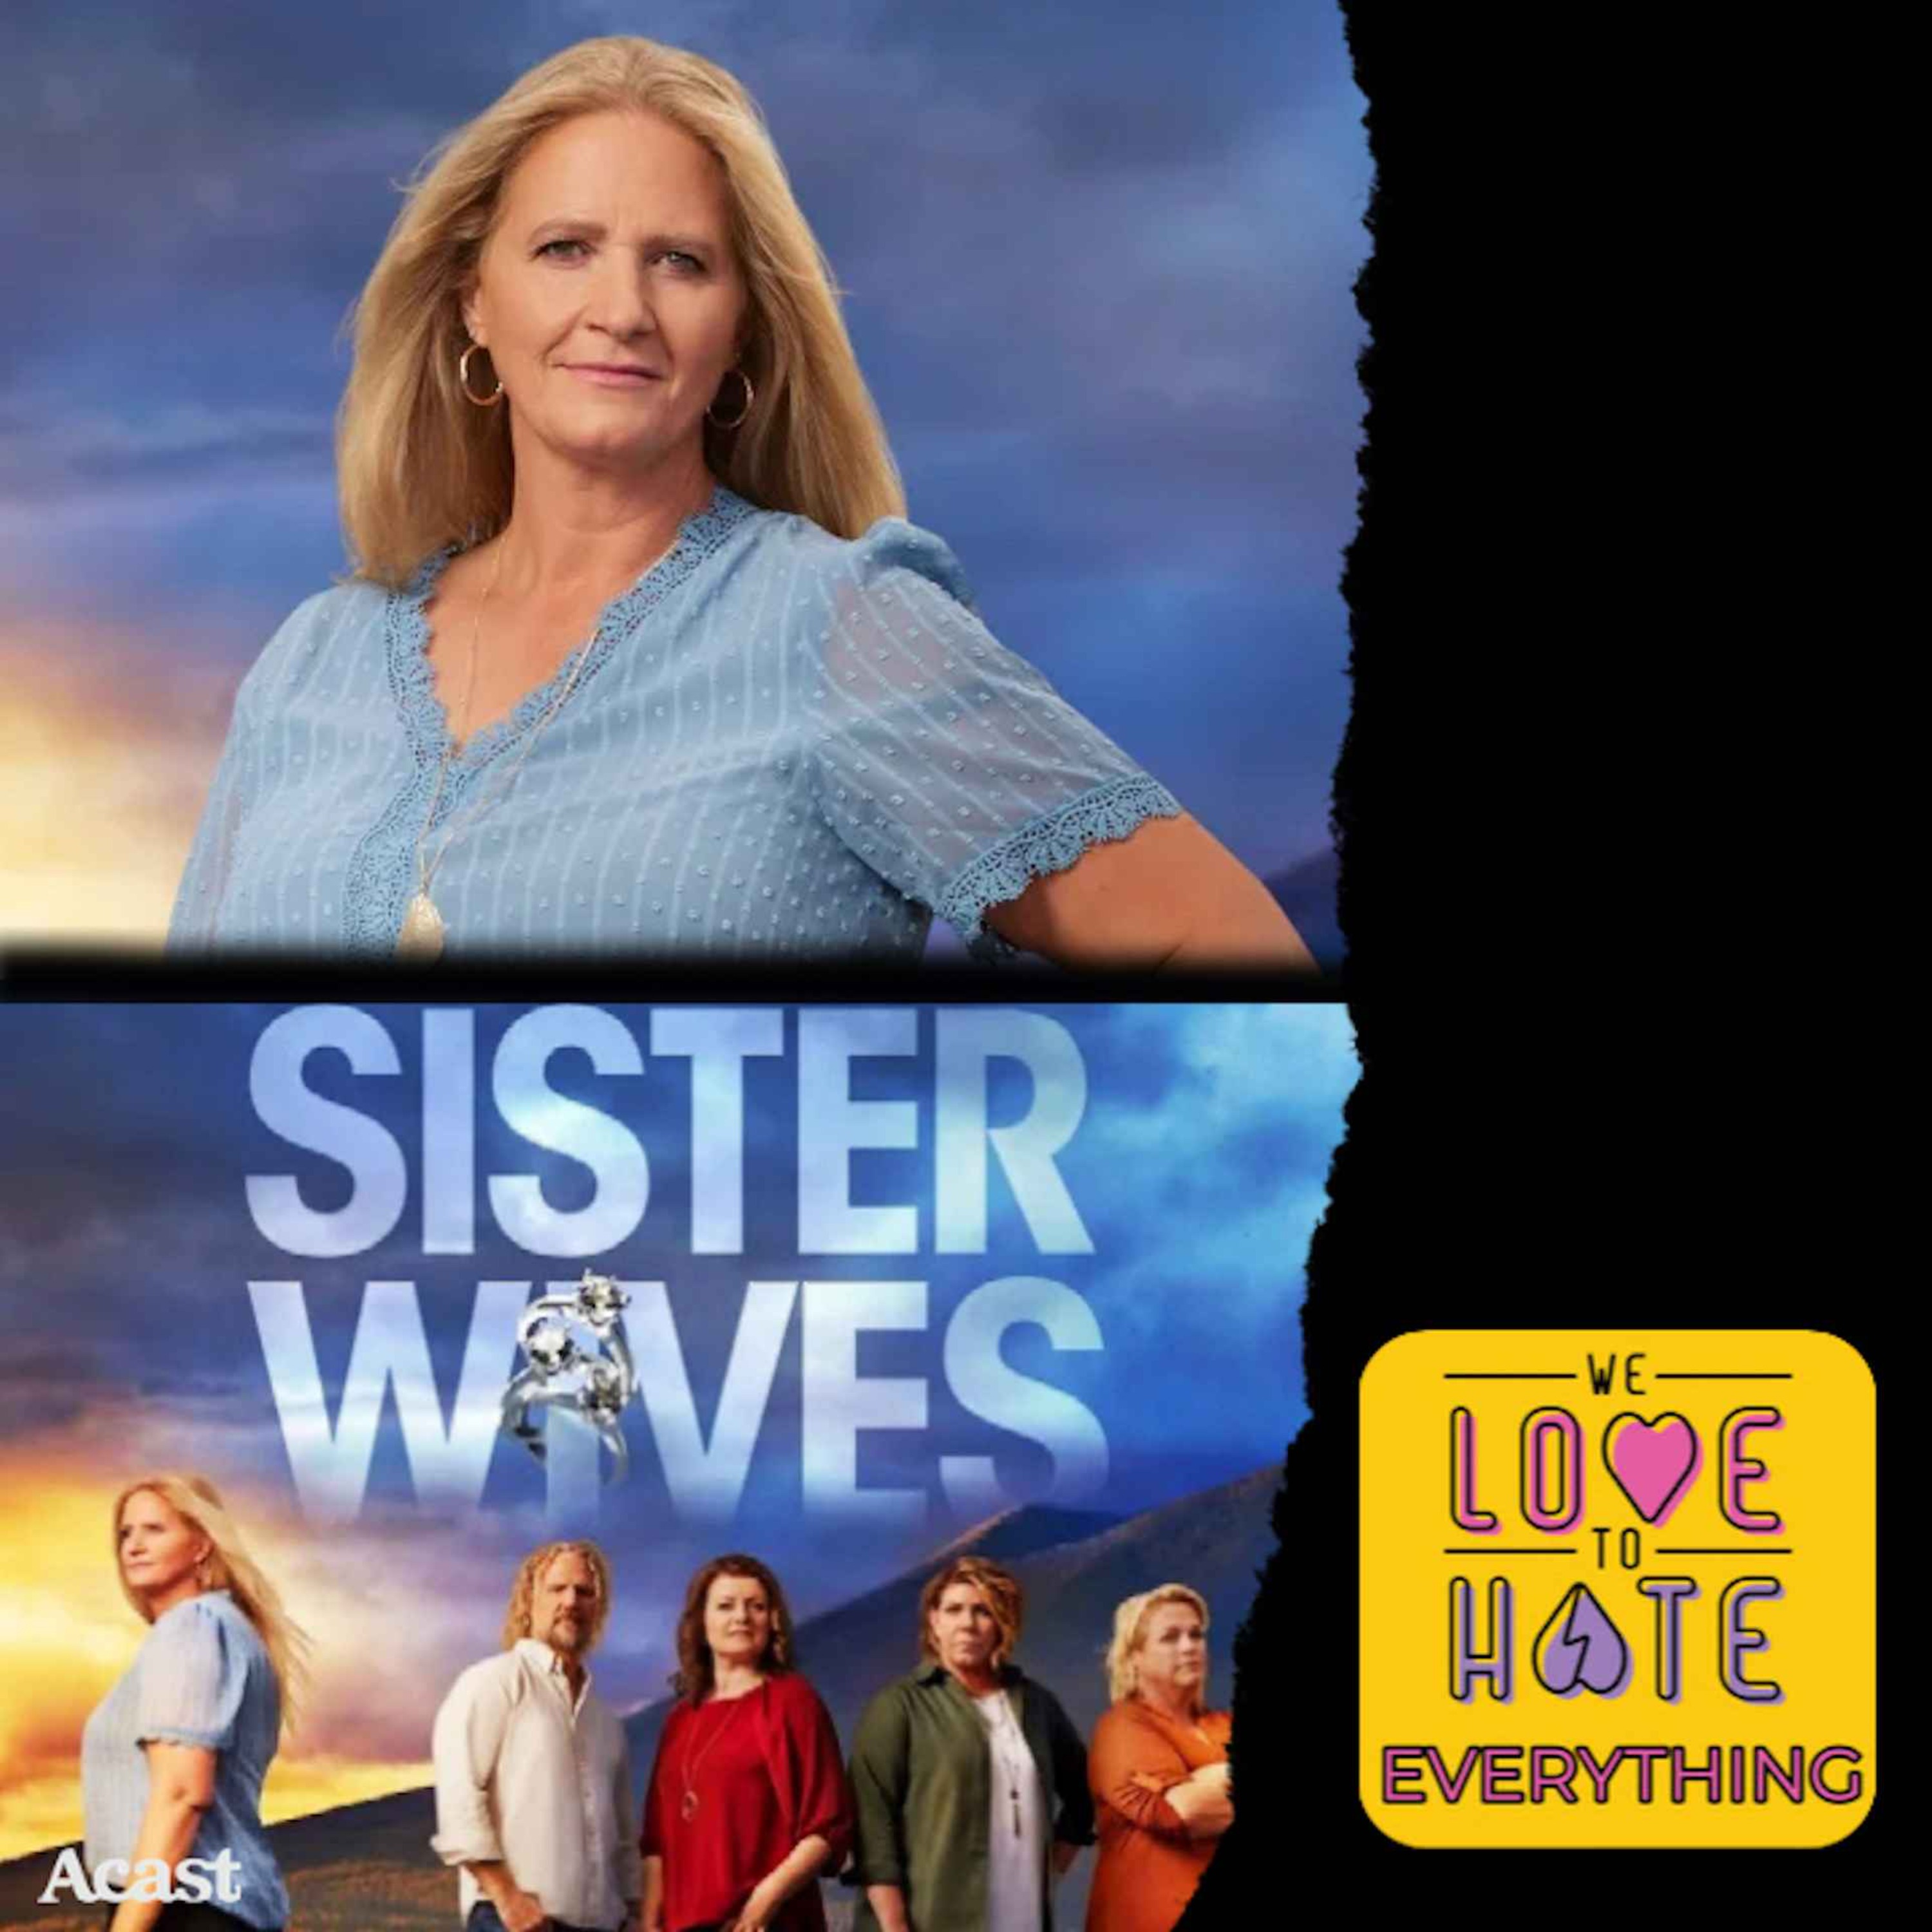 Sister Wives S17 E10 ”A Polygamist Divorce”